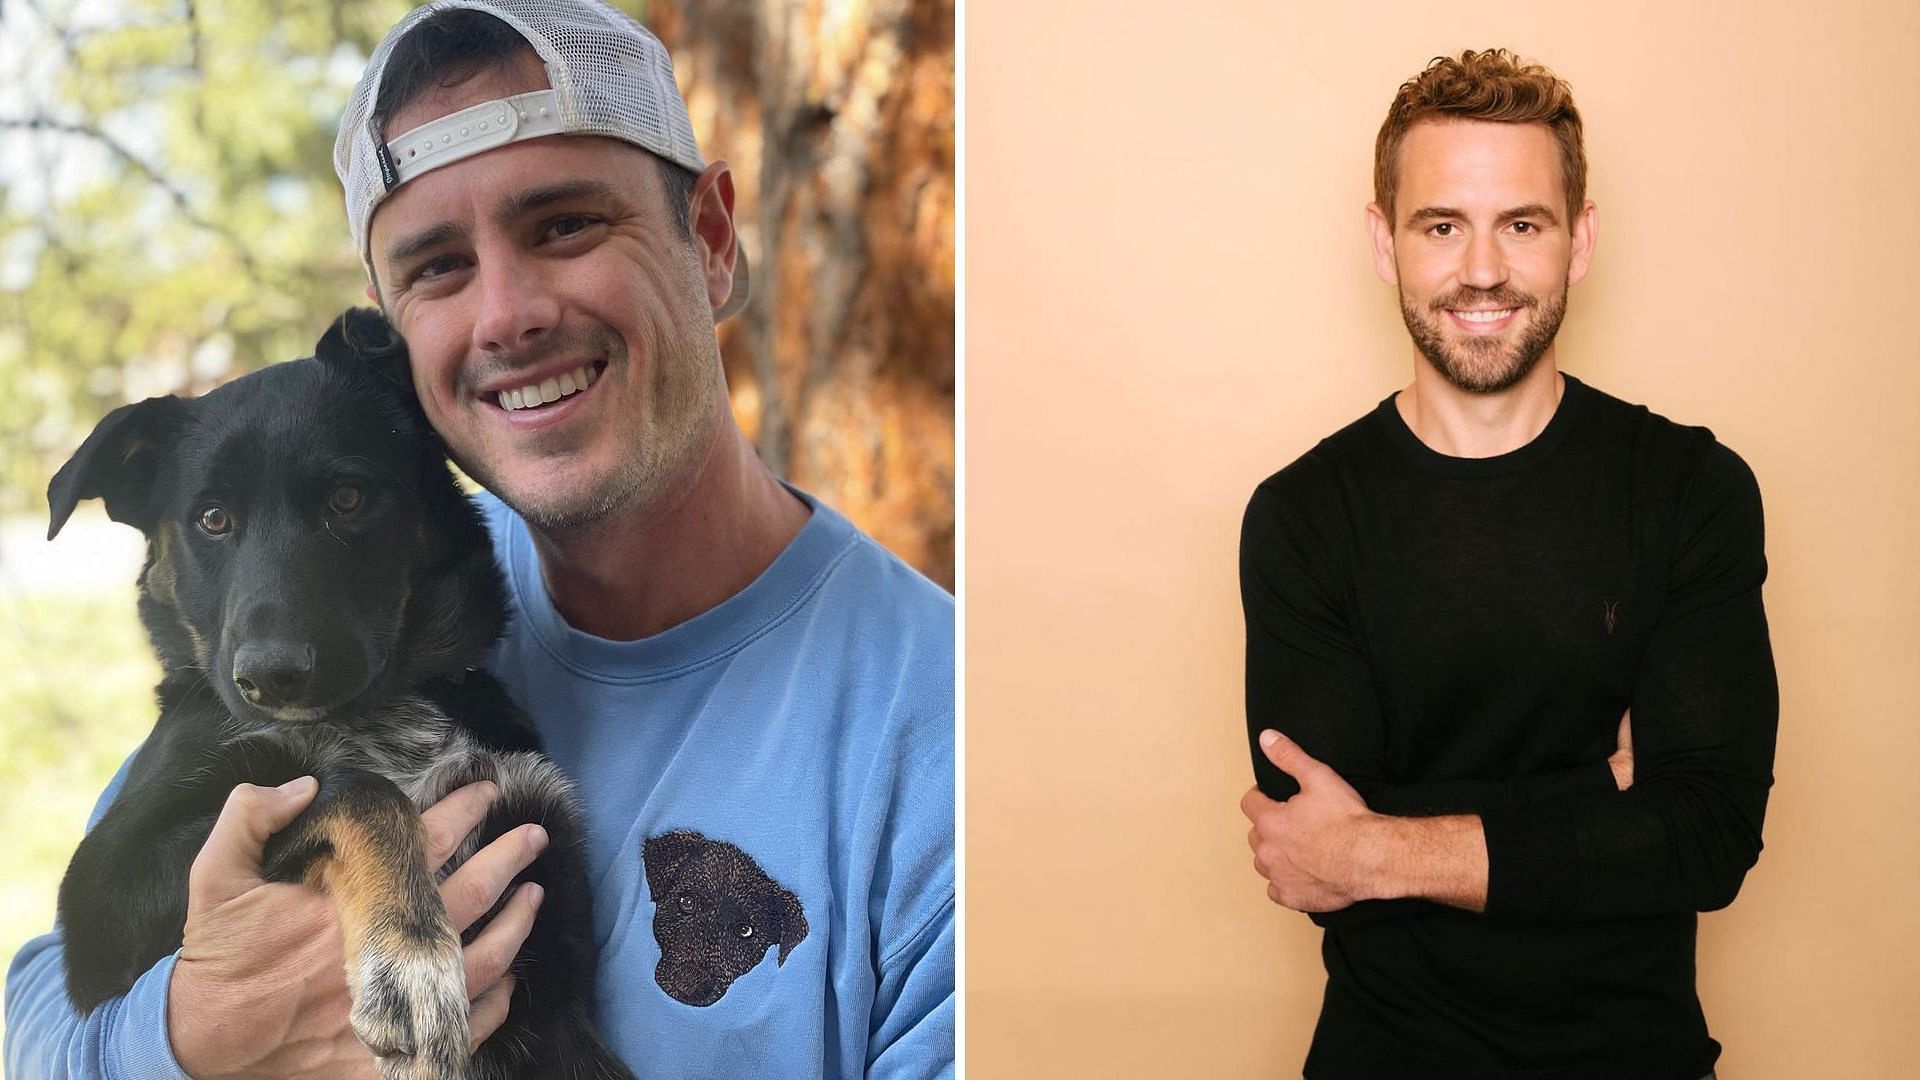 Ben Higgins and Nick Viall are set to make their appearance on Celebrity Beef (Image via Instagram/higgins.ben,nickviall)